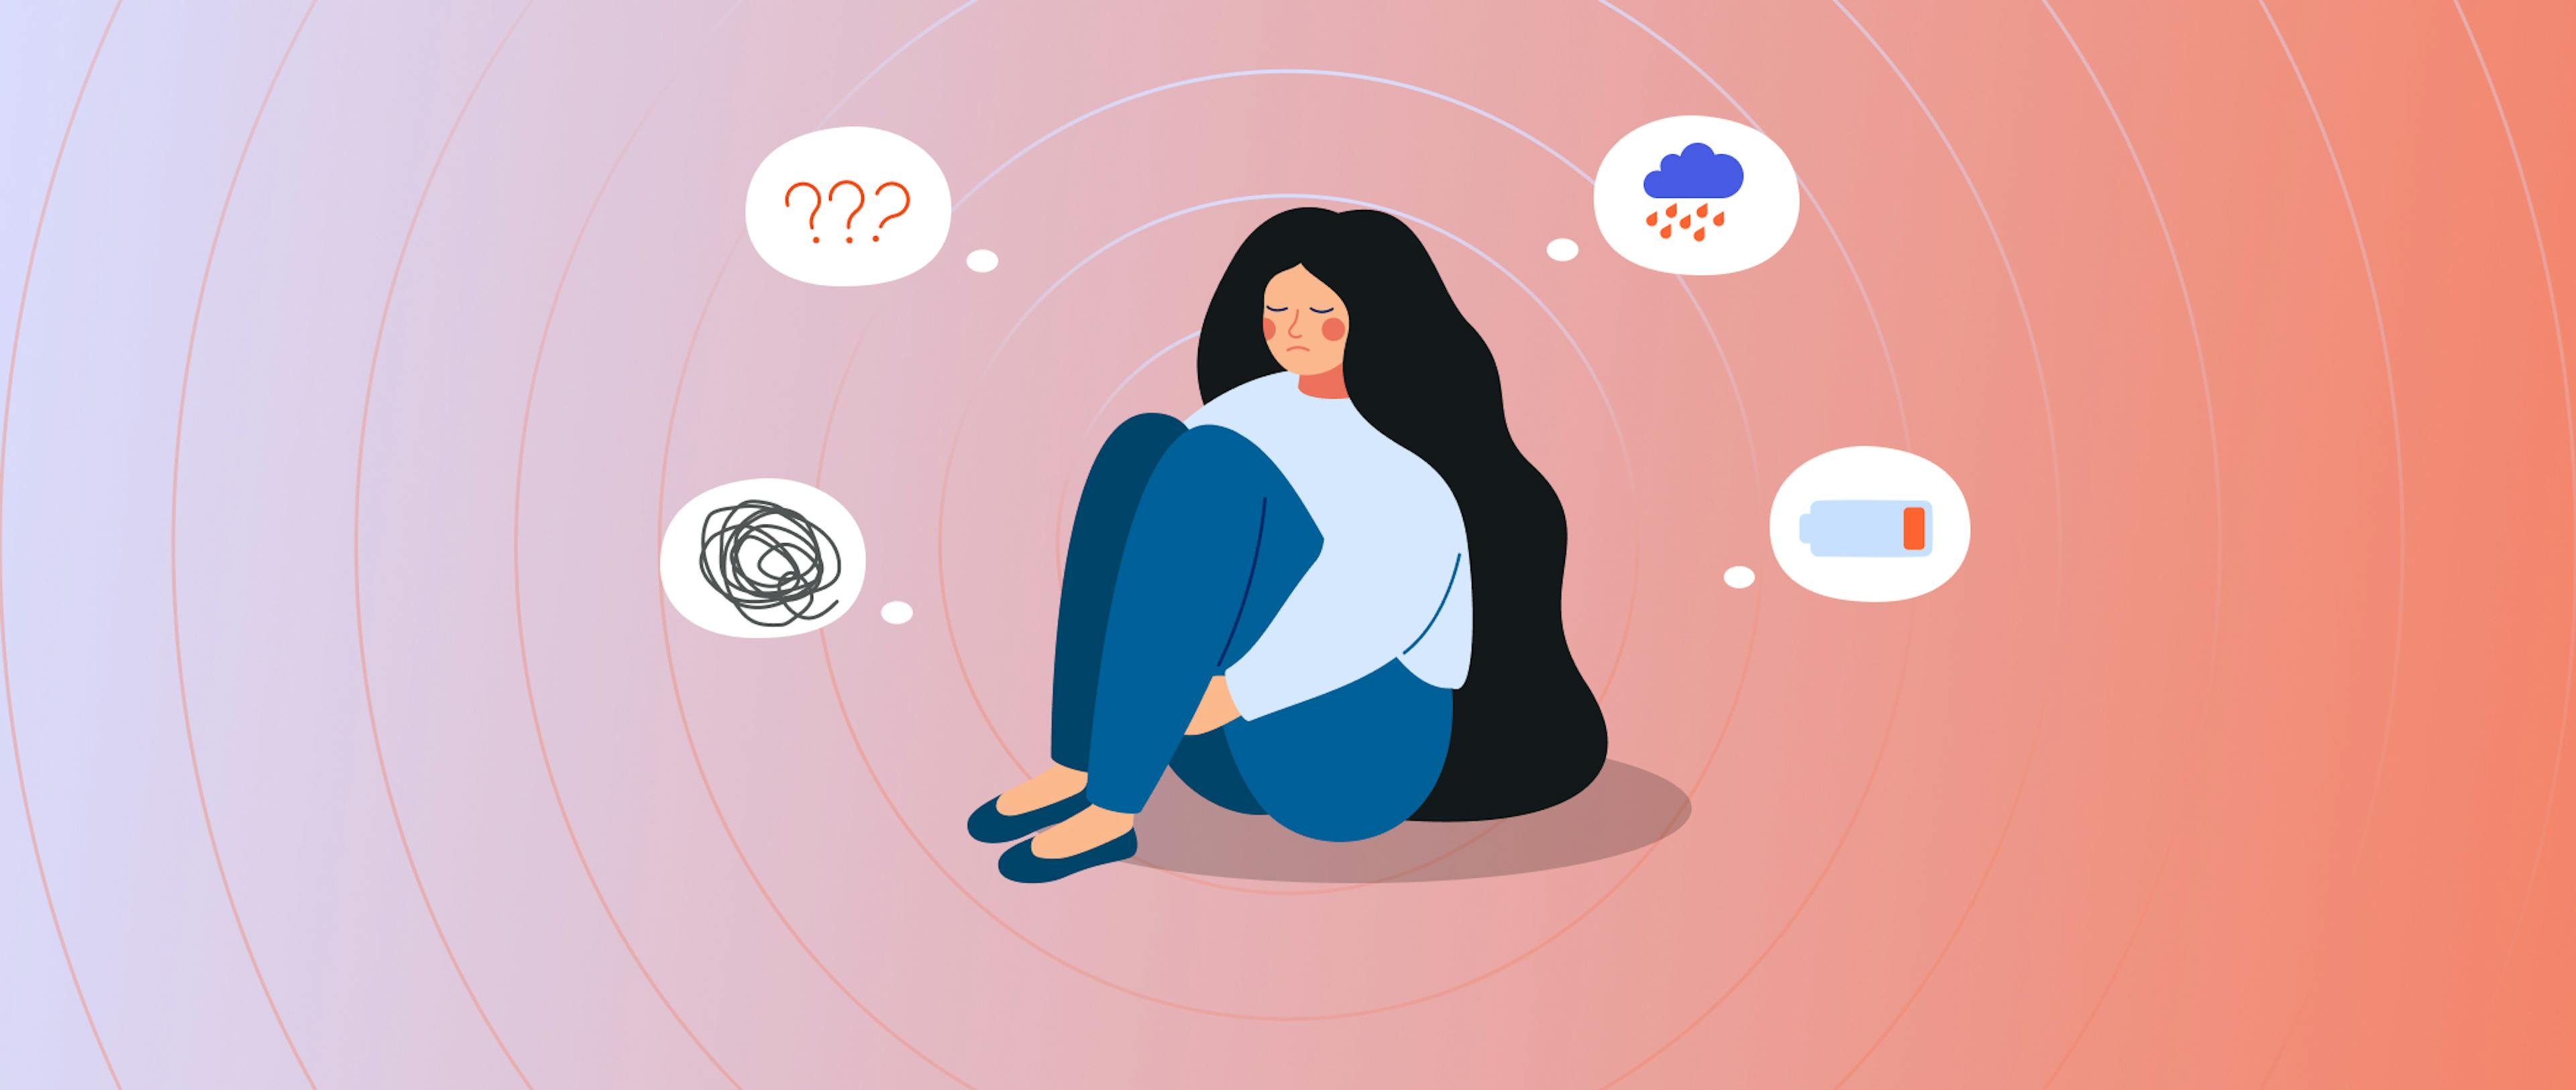 An illustration of a woman sitting on the floor, holding onto her knees with a saddened expression. She is surrounded by thought bubbles that illustrate a broken heart, a gloomy rain cloud, a low energy bar, and scrambled thoughts.